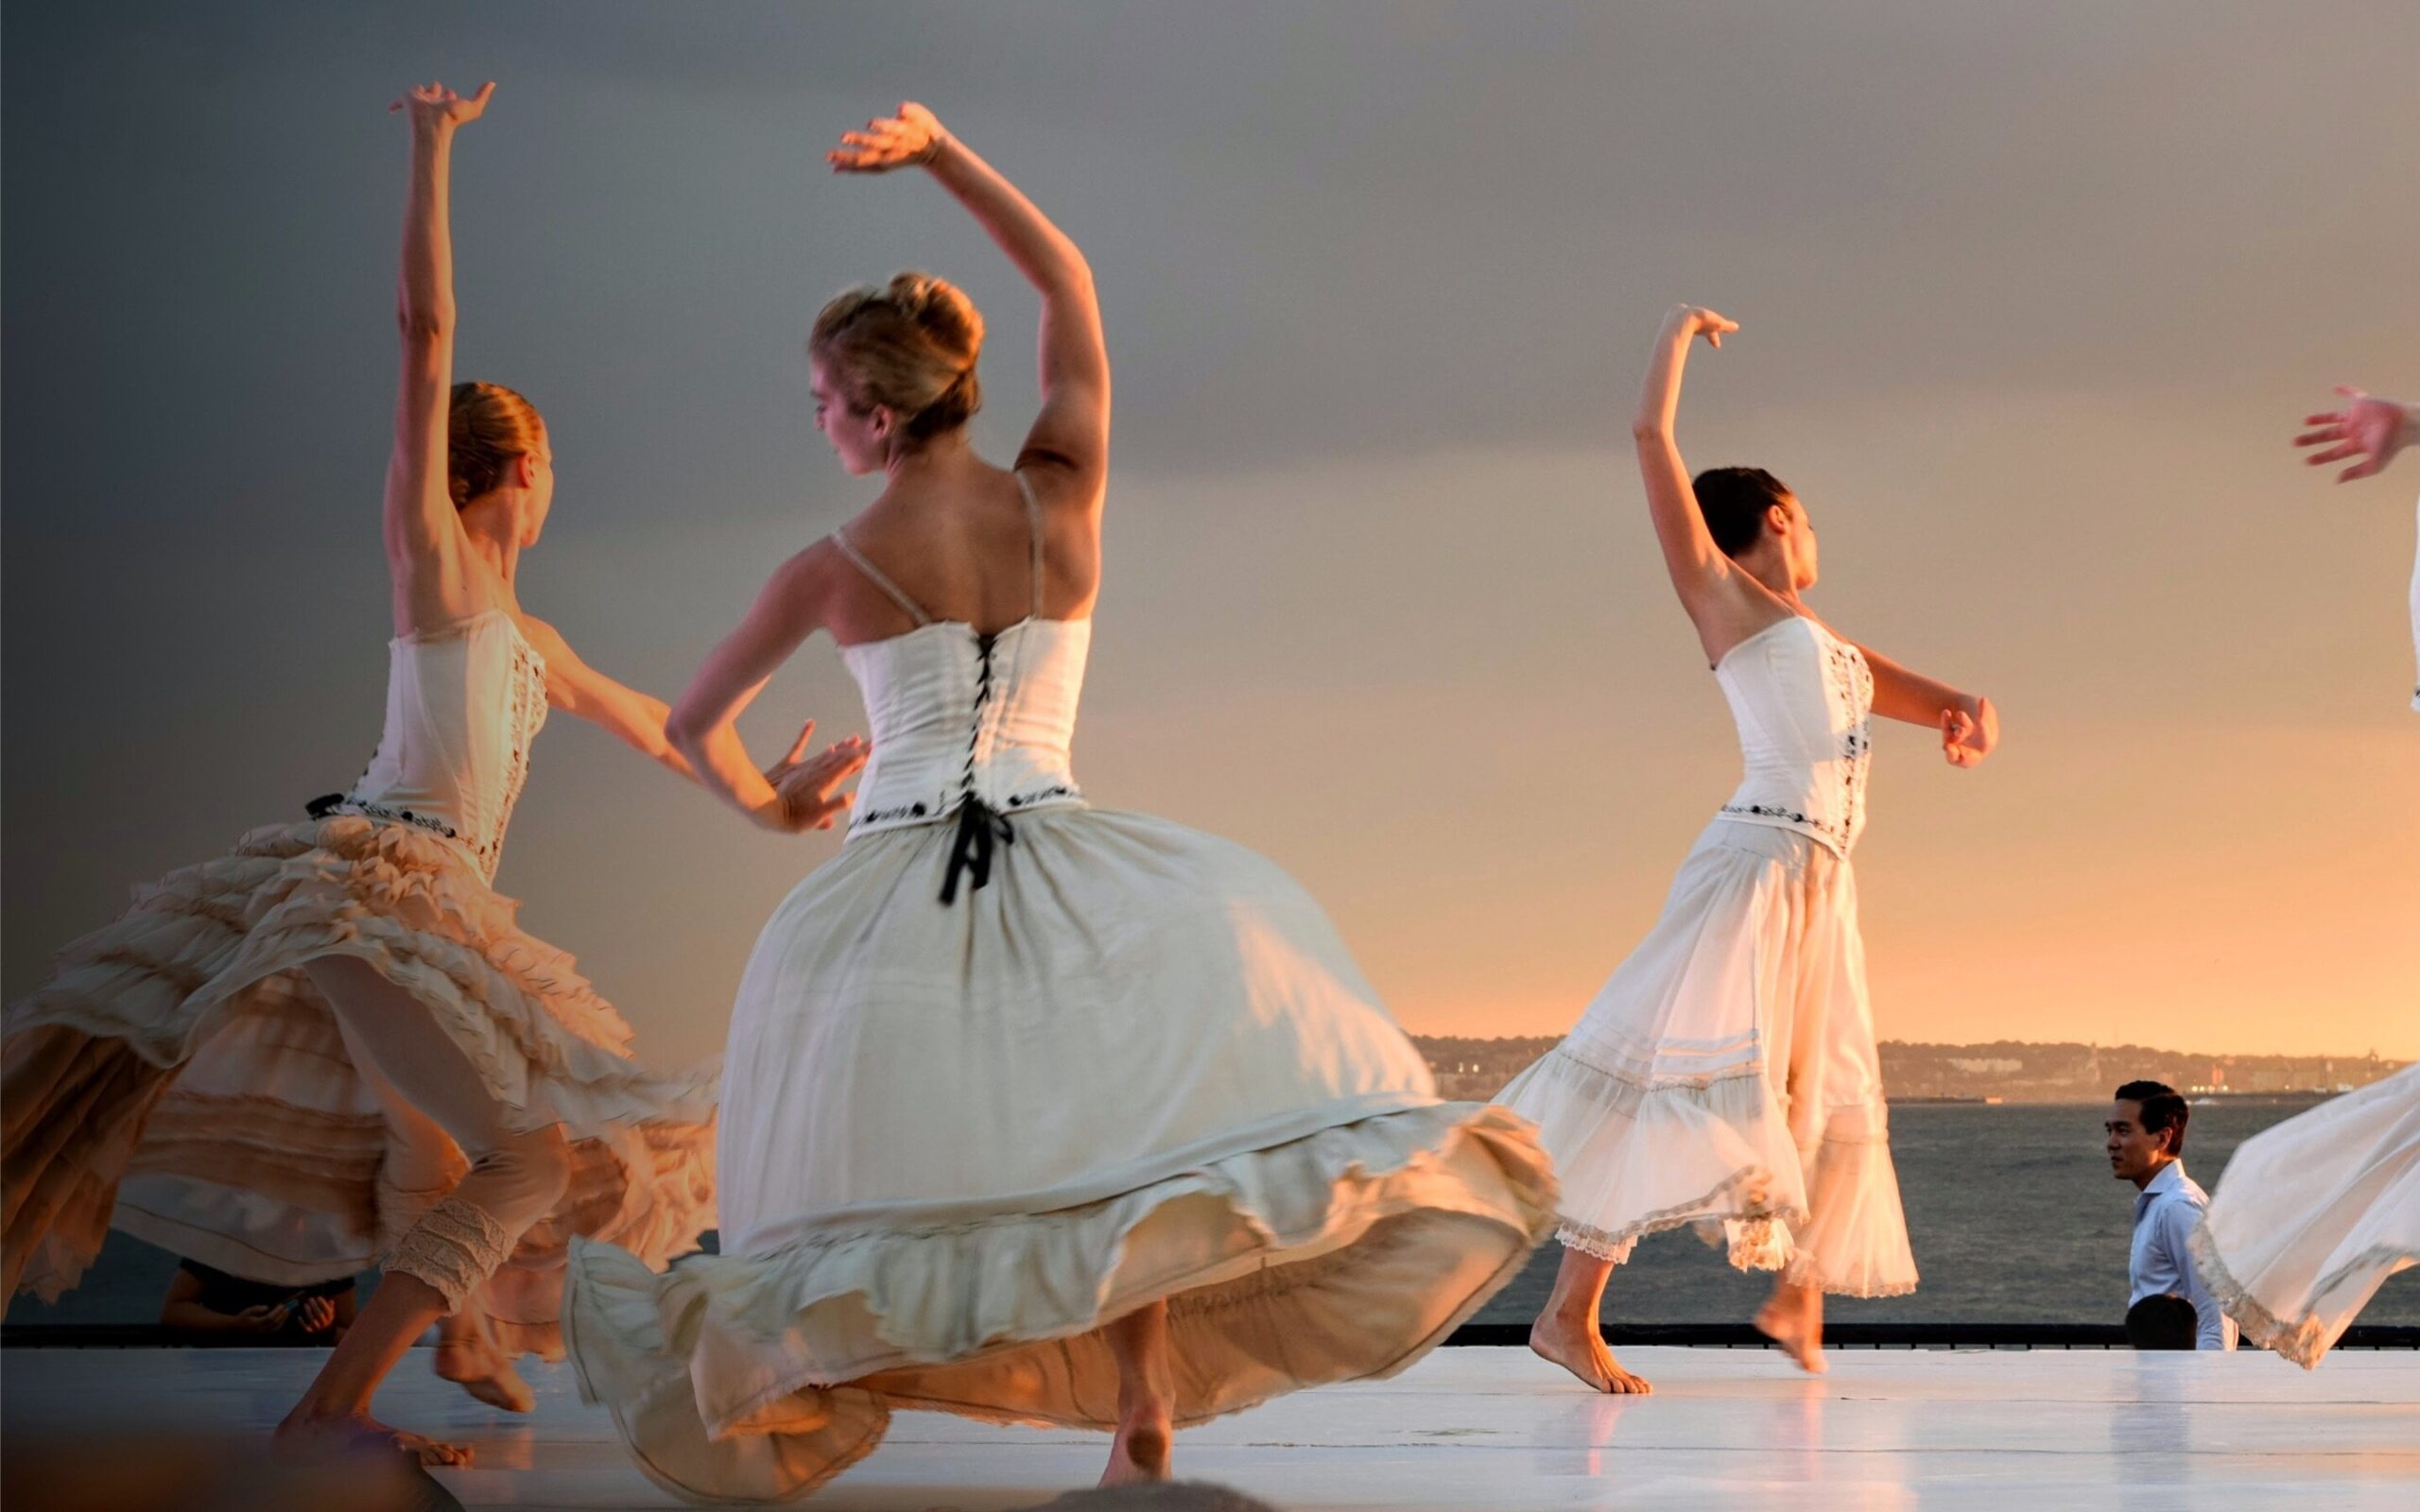 A series of people dance in white dresses on a warm lit stage